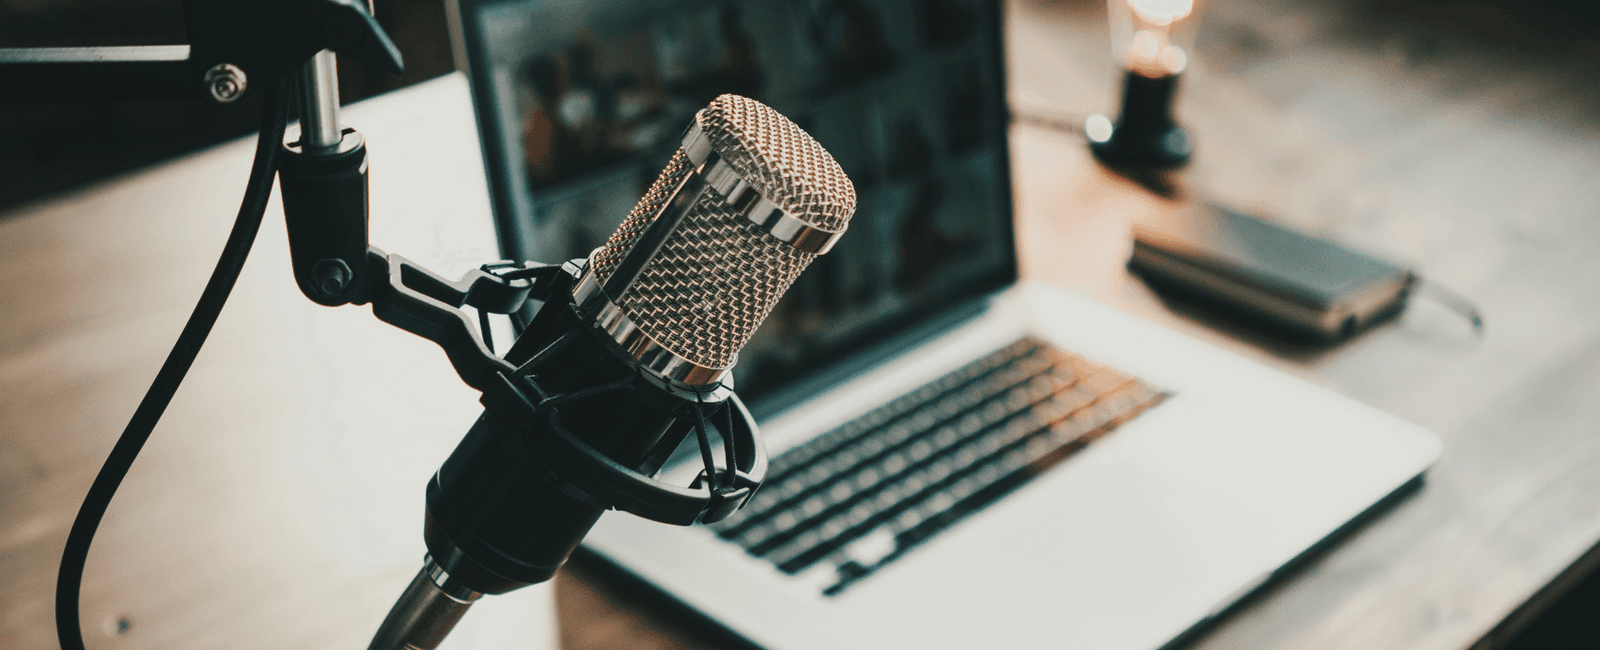 Podcasts: The New Frontier of Storytelling and Culture